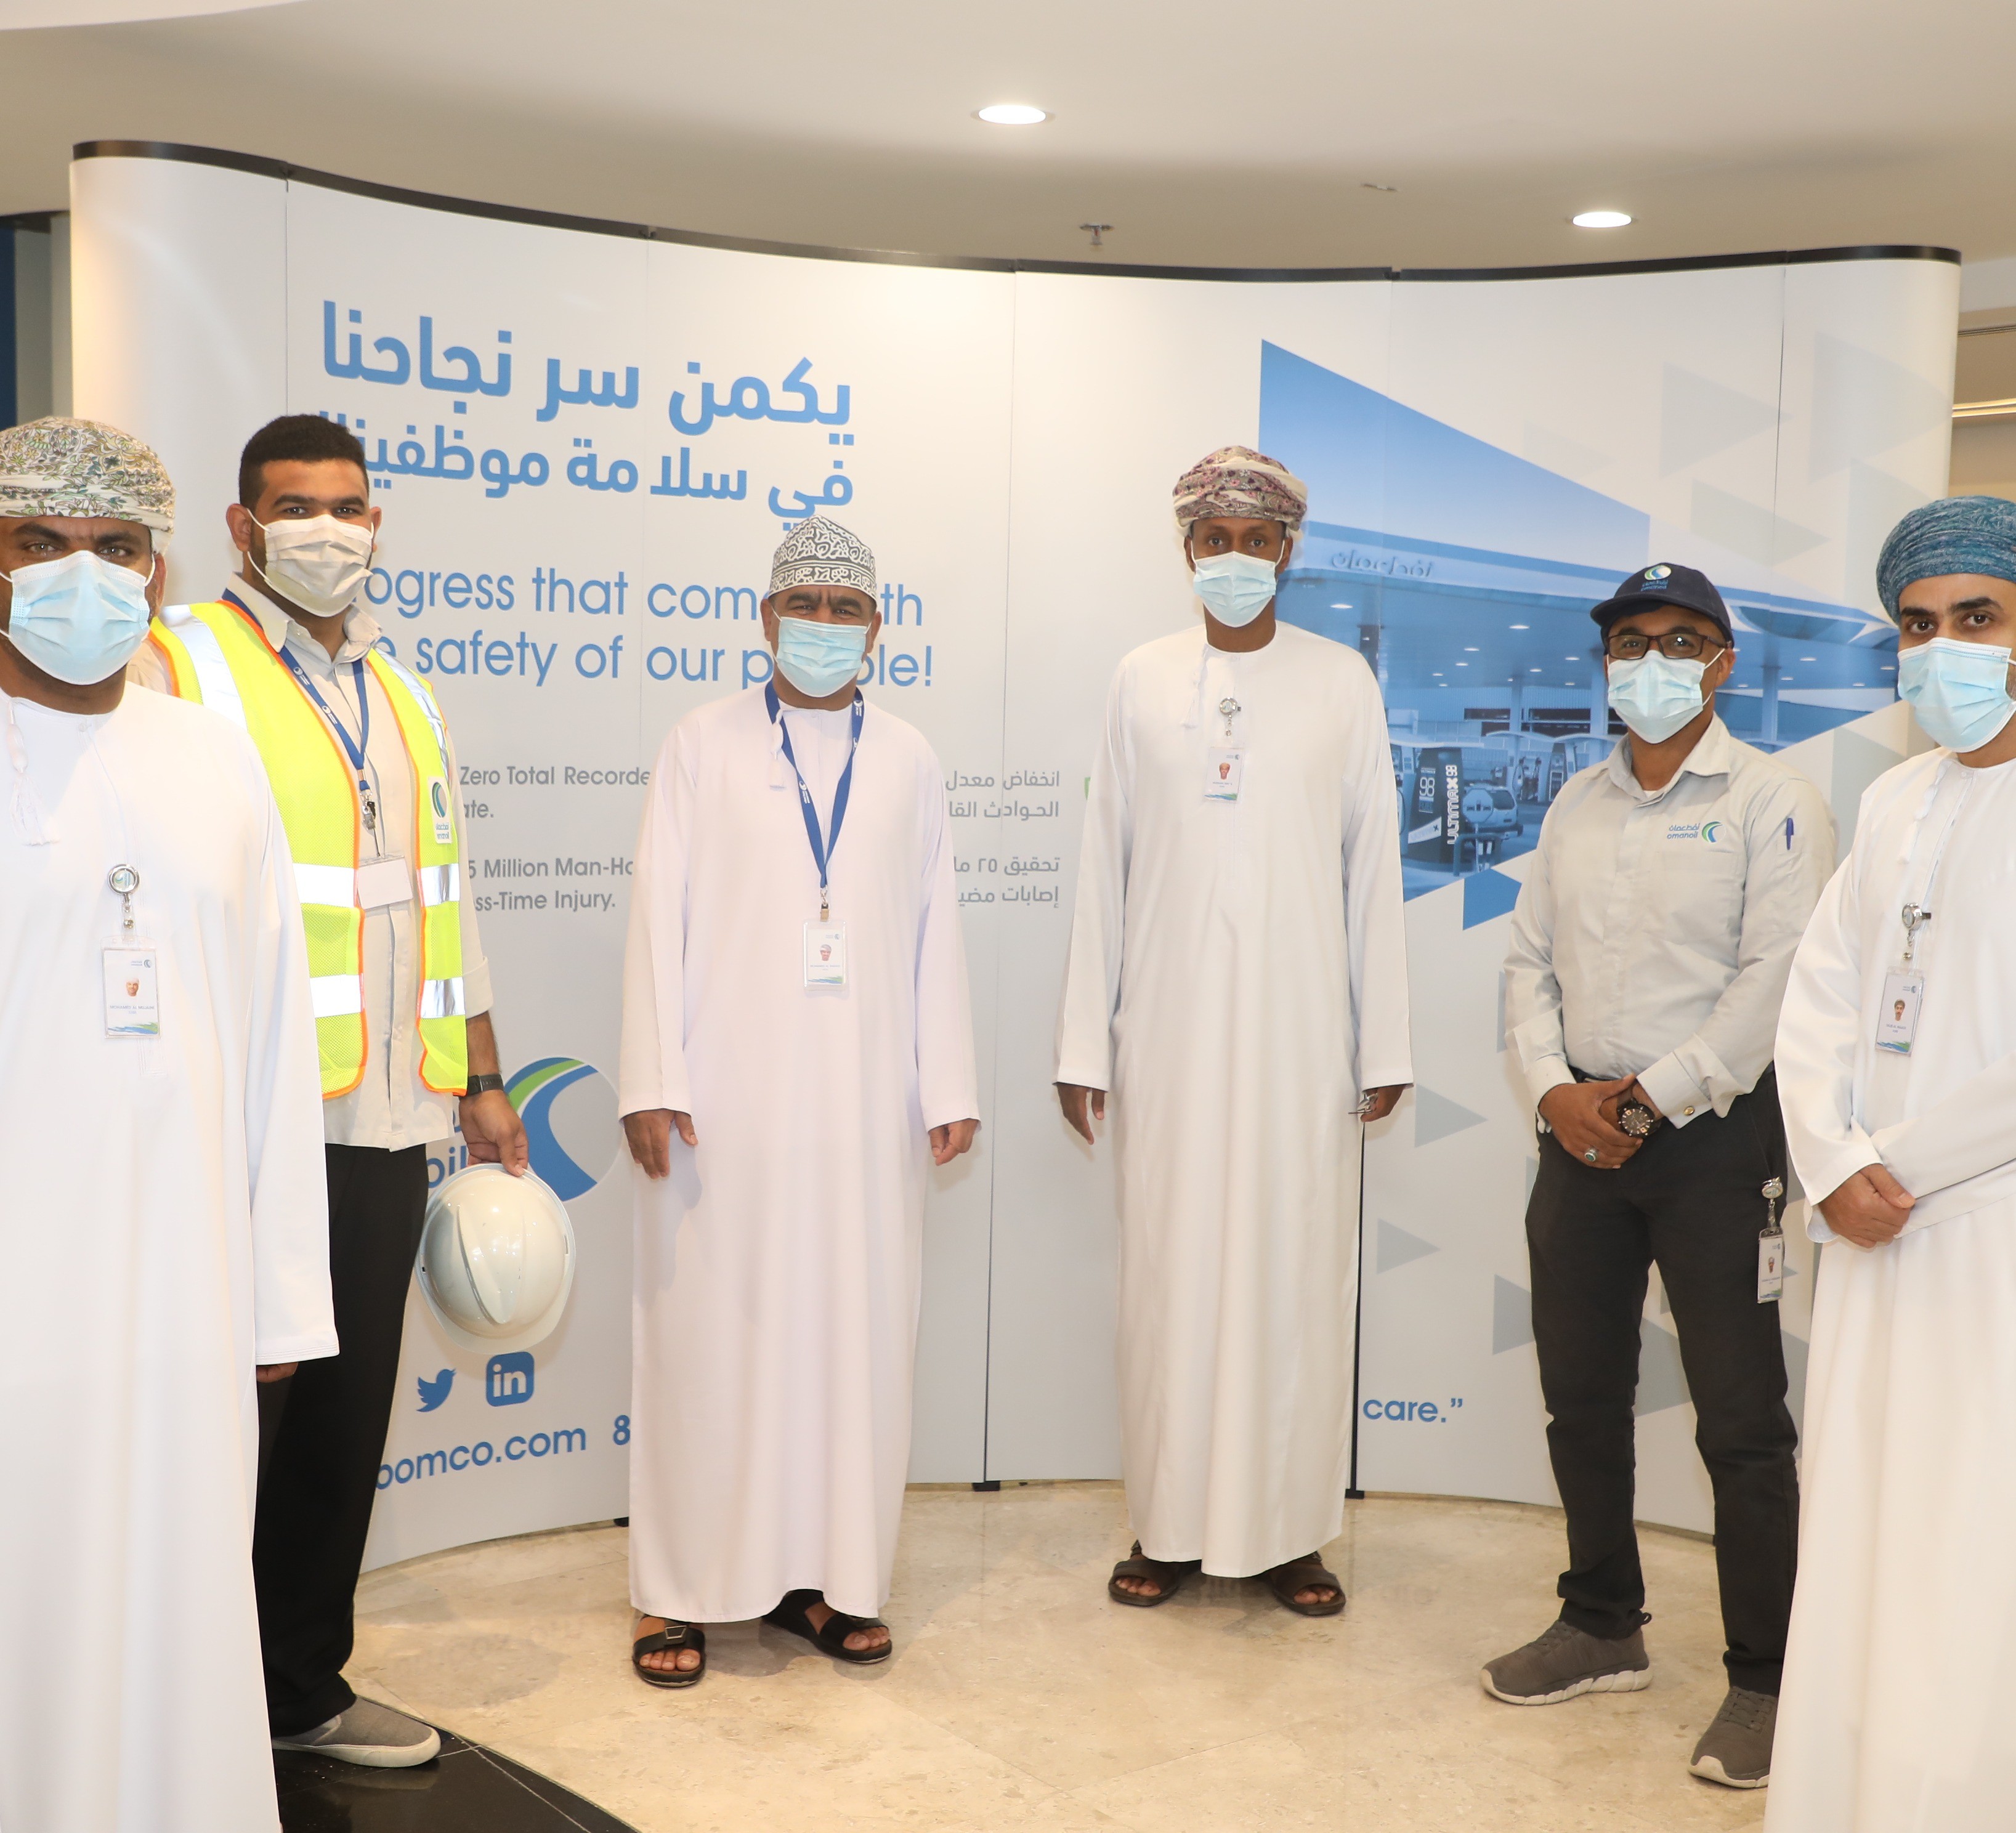 OMAN OIL MARKETING COMPANY CELEBRATES 25 MILLION HOURS WITH ZERO RECORDABLE INJURIES